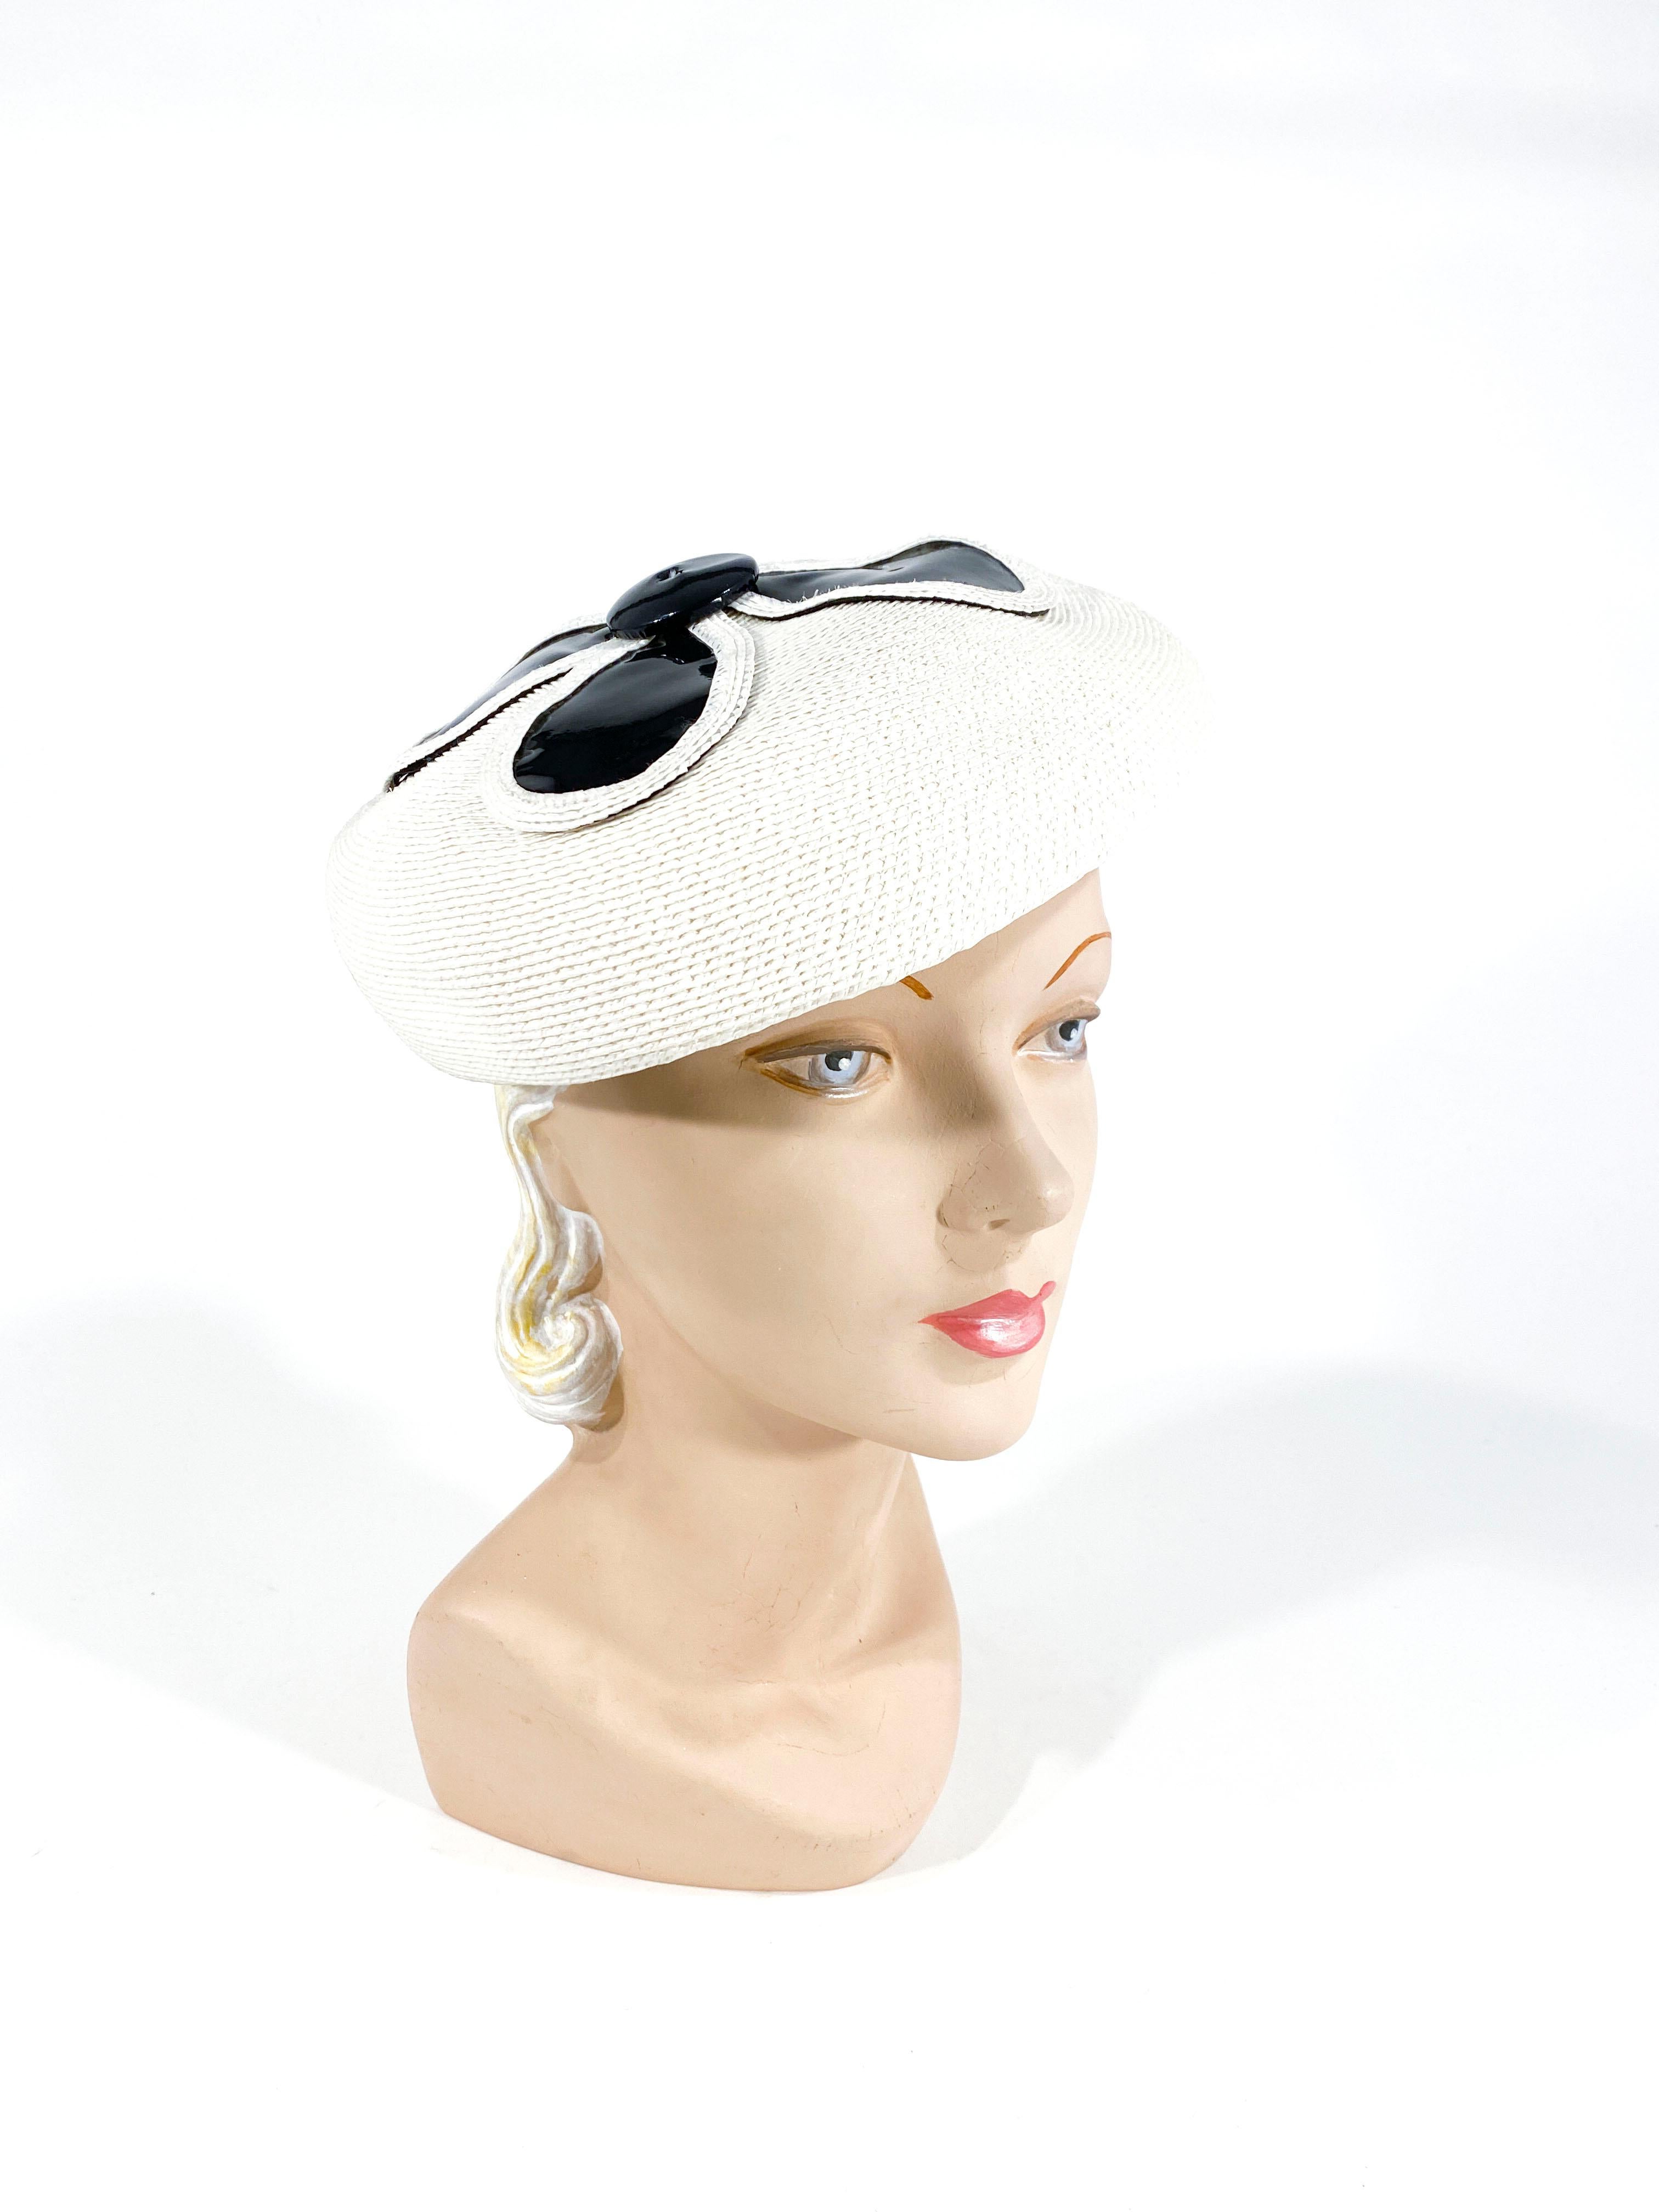 1960s mod white coated woven straw beret style hat with navy blue patent leather accents. 